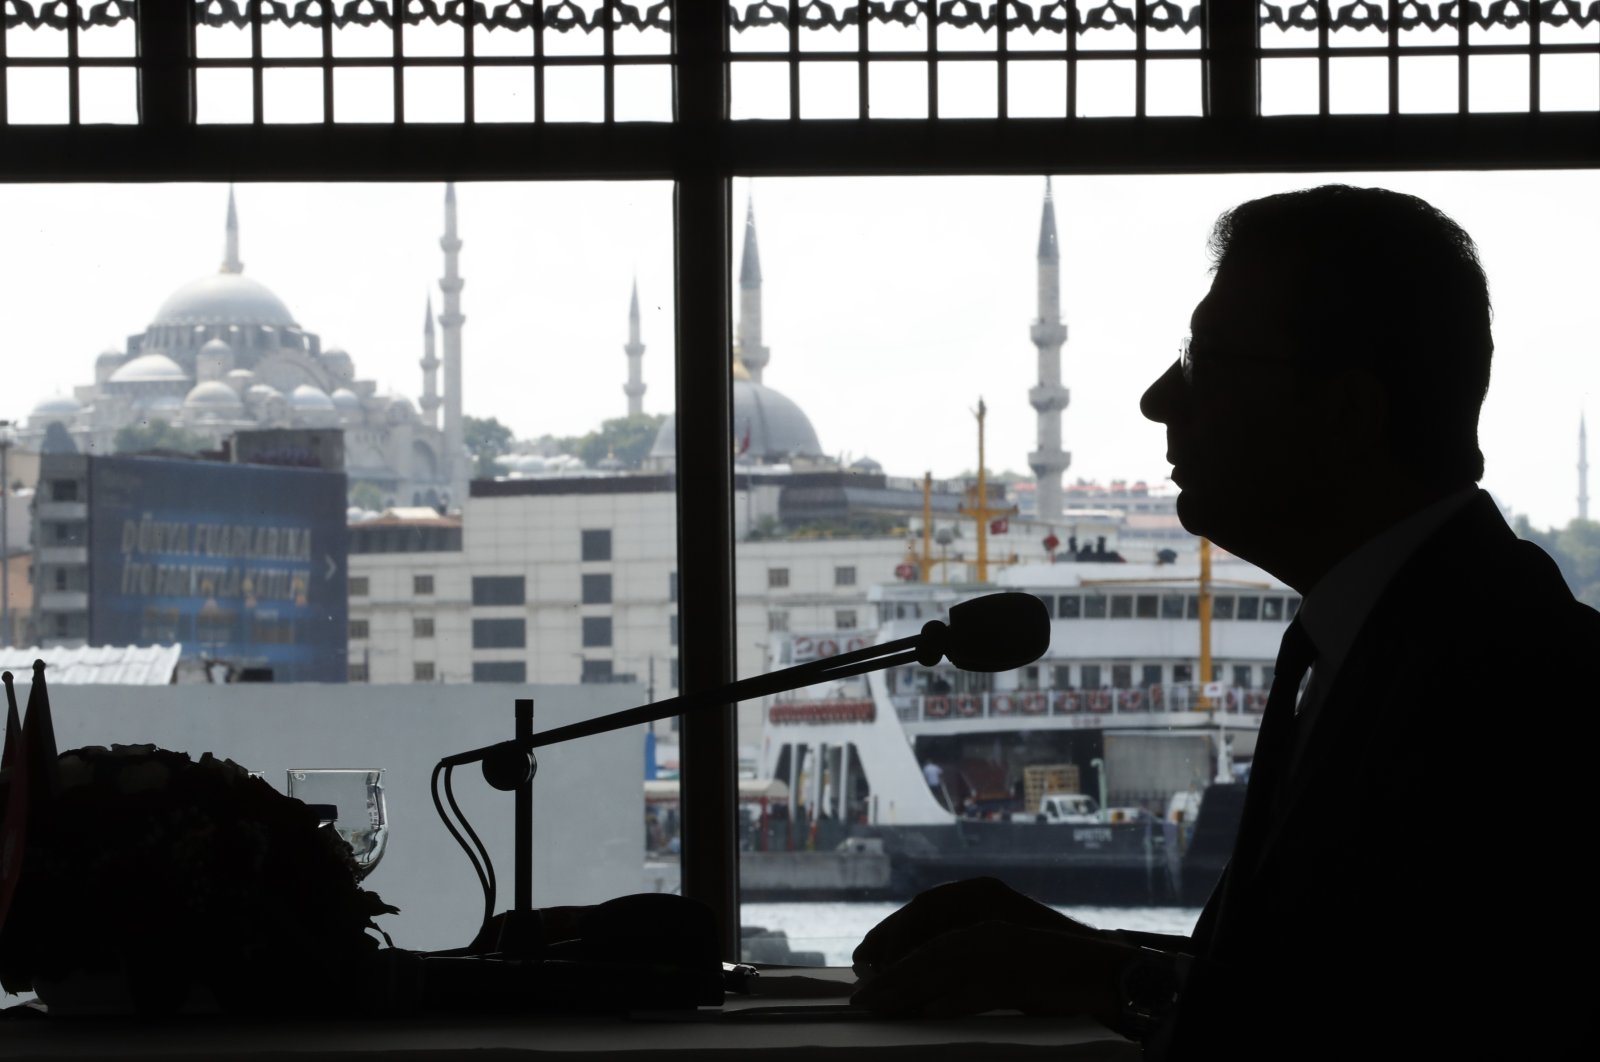 Istanbul Mayor Ekrem Imamoğlu talks to members of foreign media a day after he took office, in Istanbul, Turkey, June 28, 2019. (AP Photo)